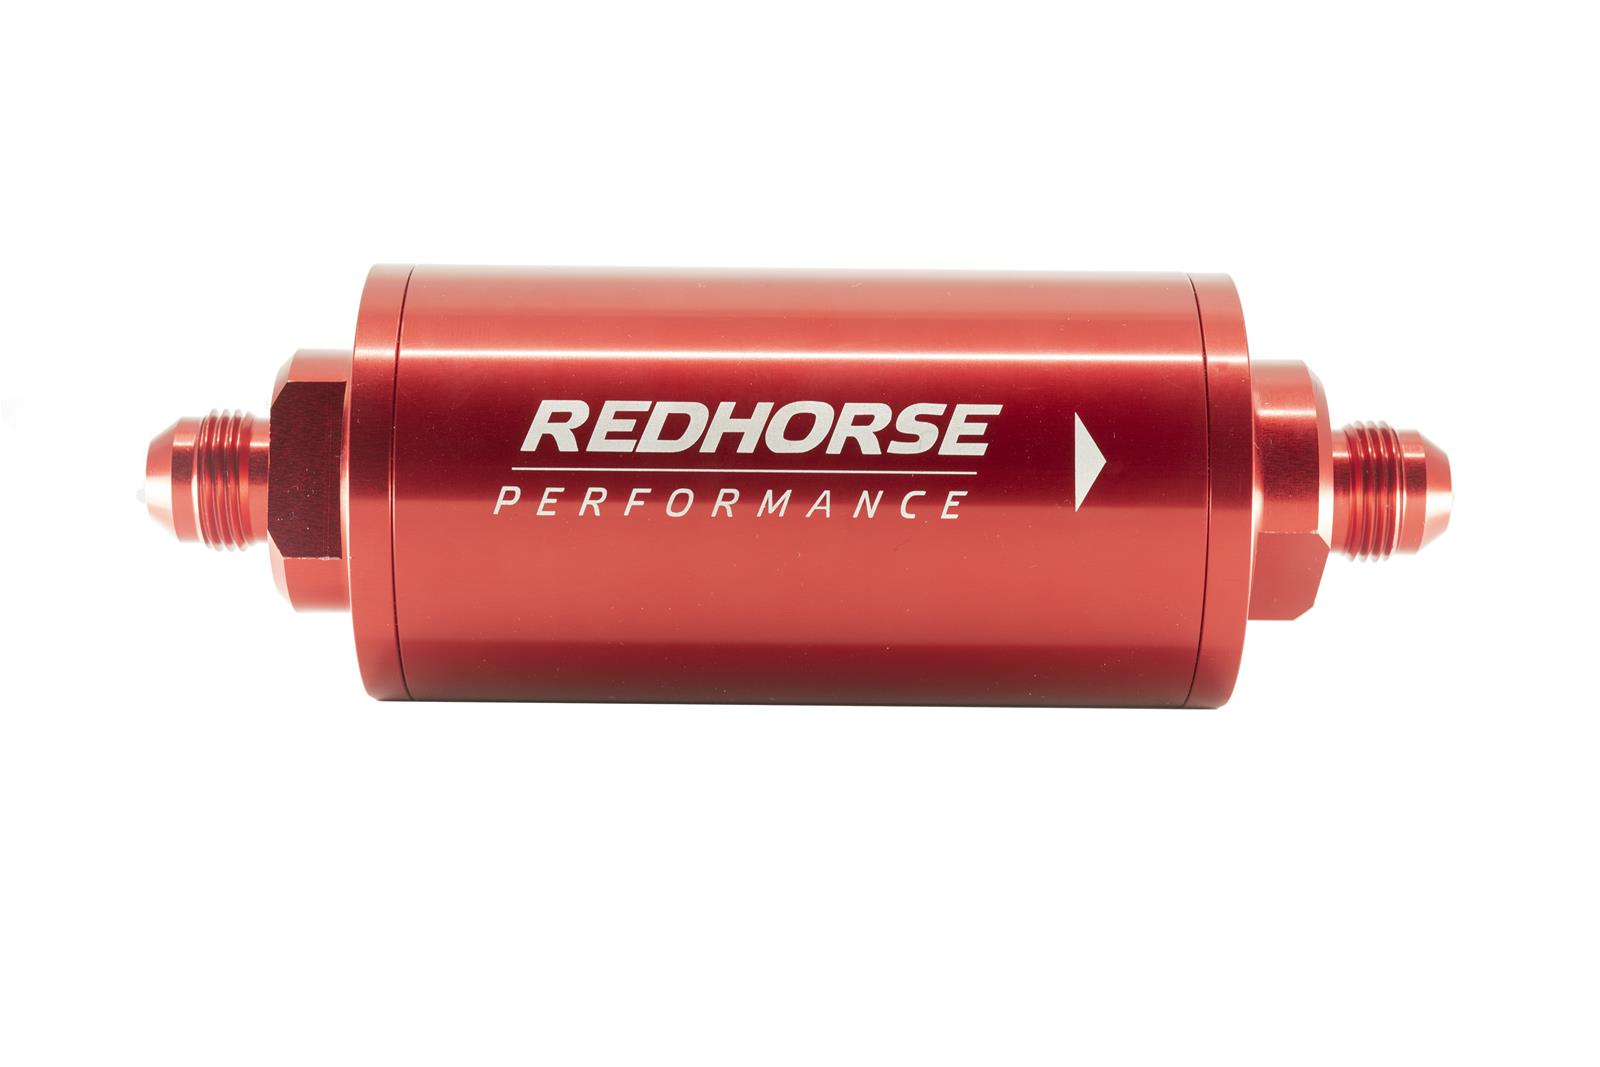 Redhorse Performance 4651-08-3-12 6in Cylindrical In-Line Race Fuel Filter w/ 12 Micron Fiberglass element - 08 AN